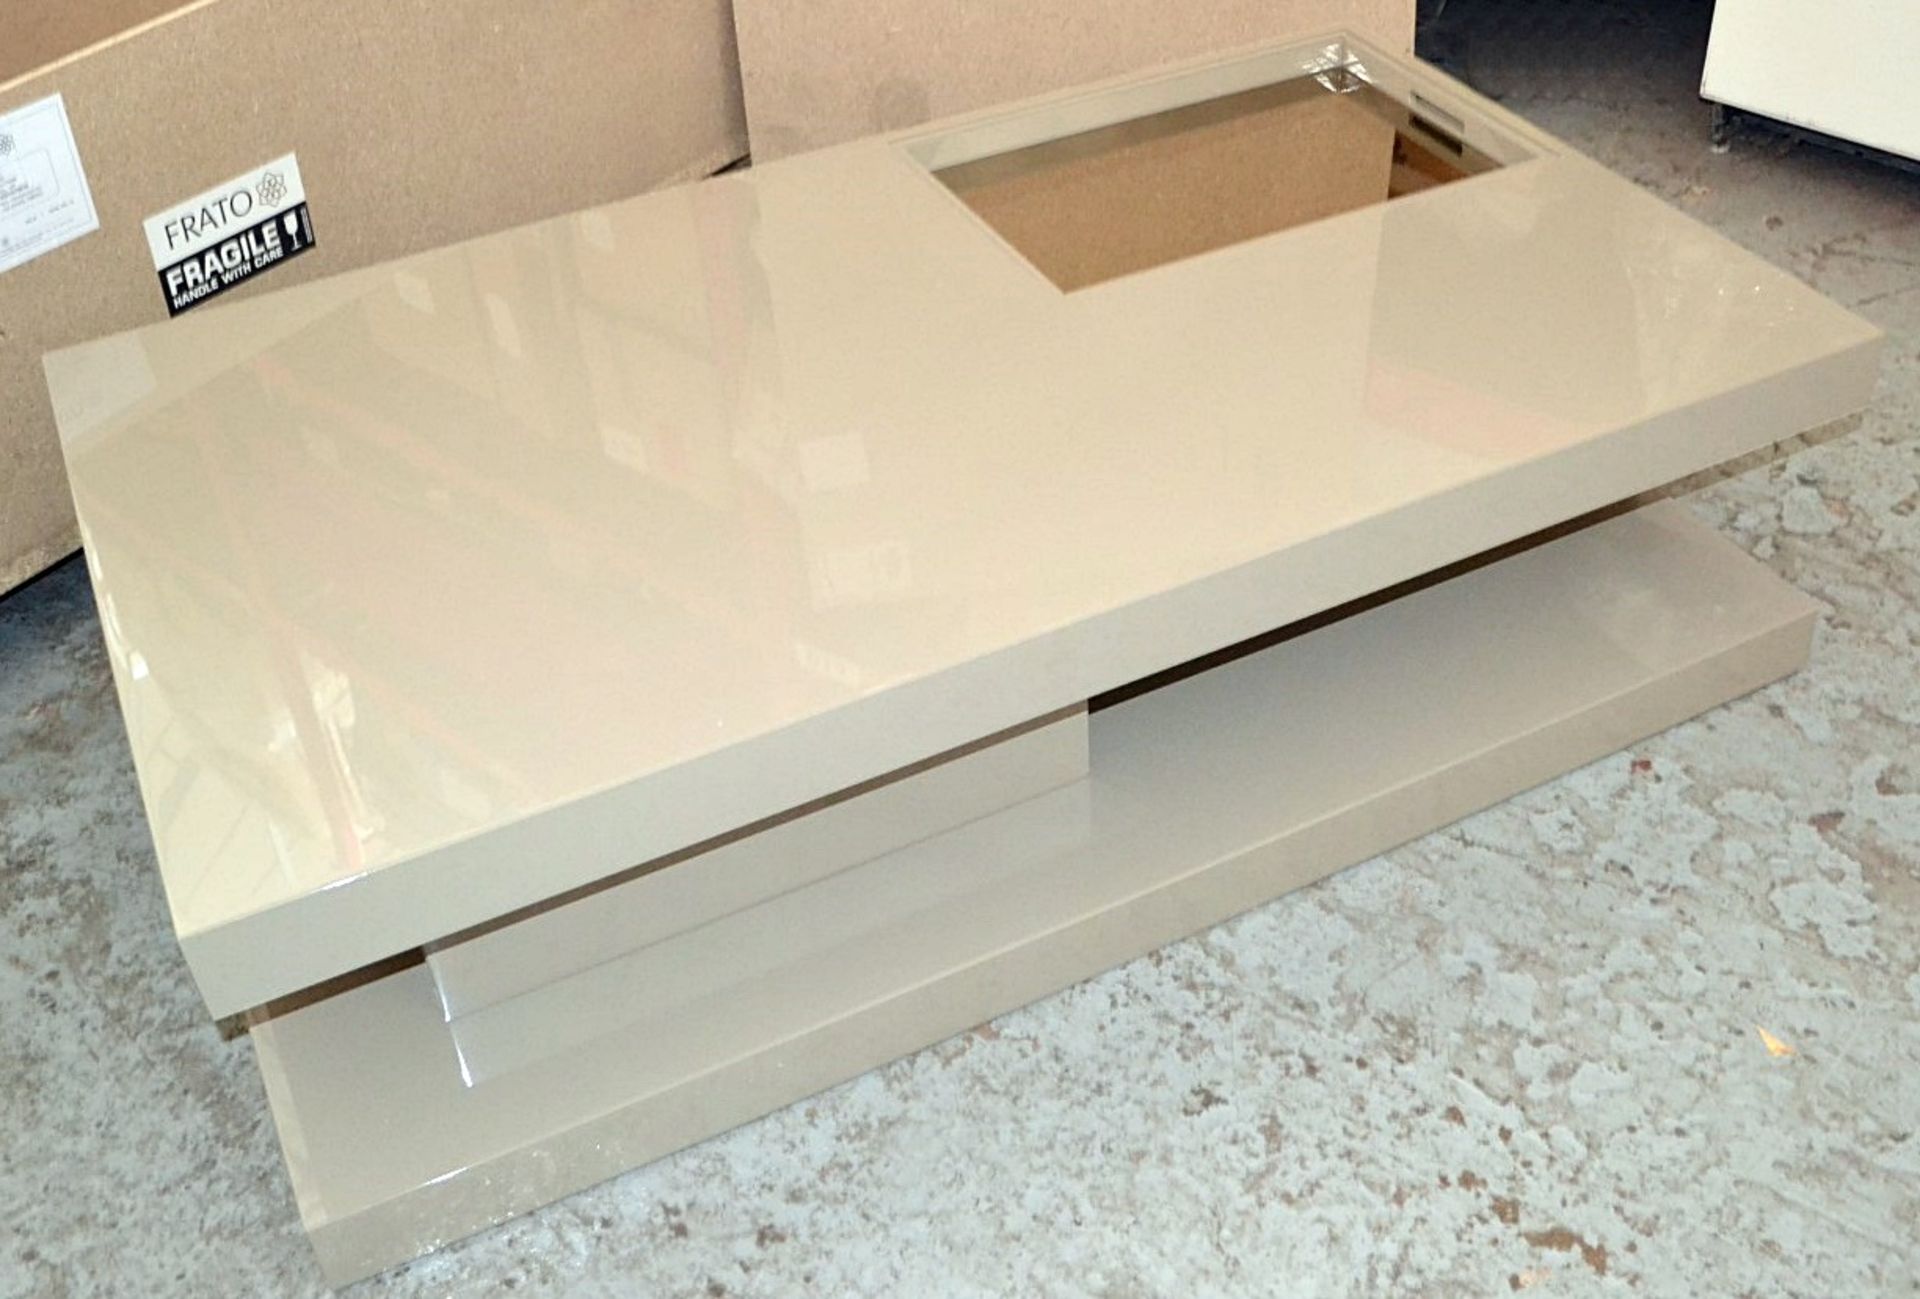 1 x FRATO Saldanha Coffee Table - Features A Push-To-Open Drawer, And Light Grey Lacqured Finish - - Image 7 of 8